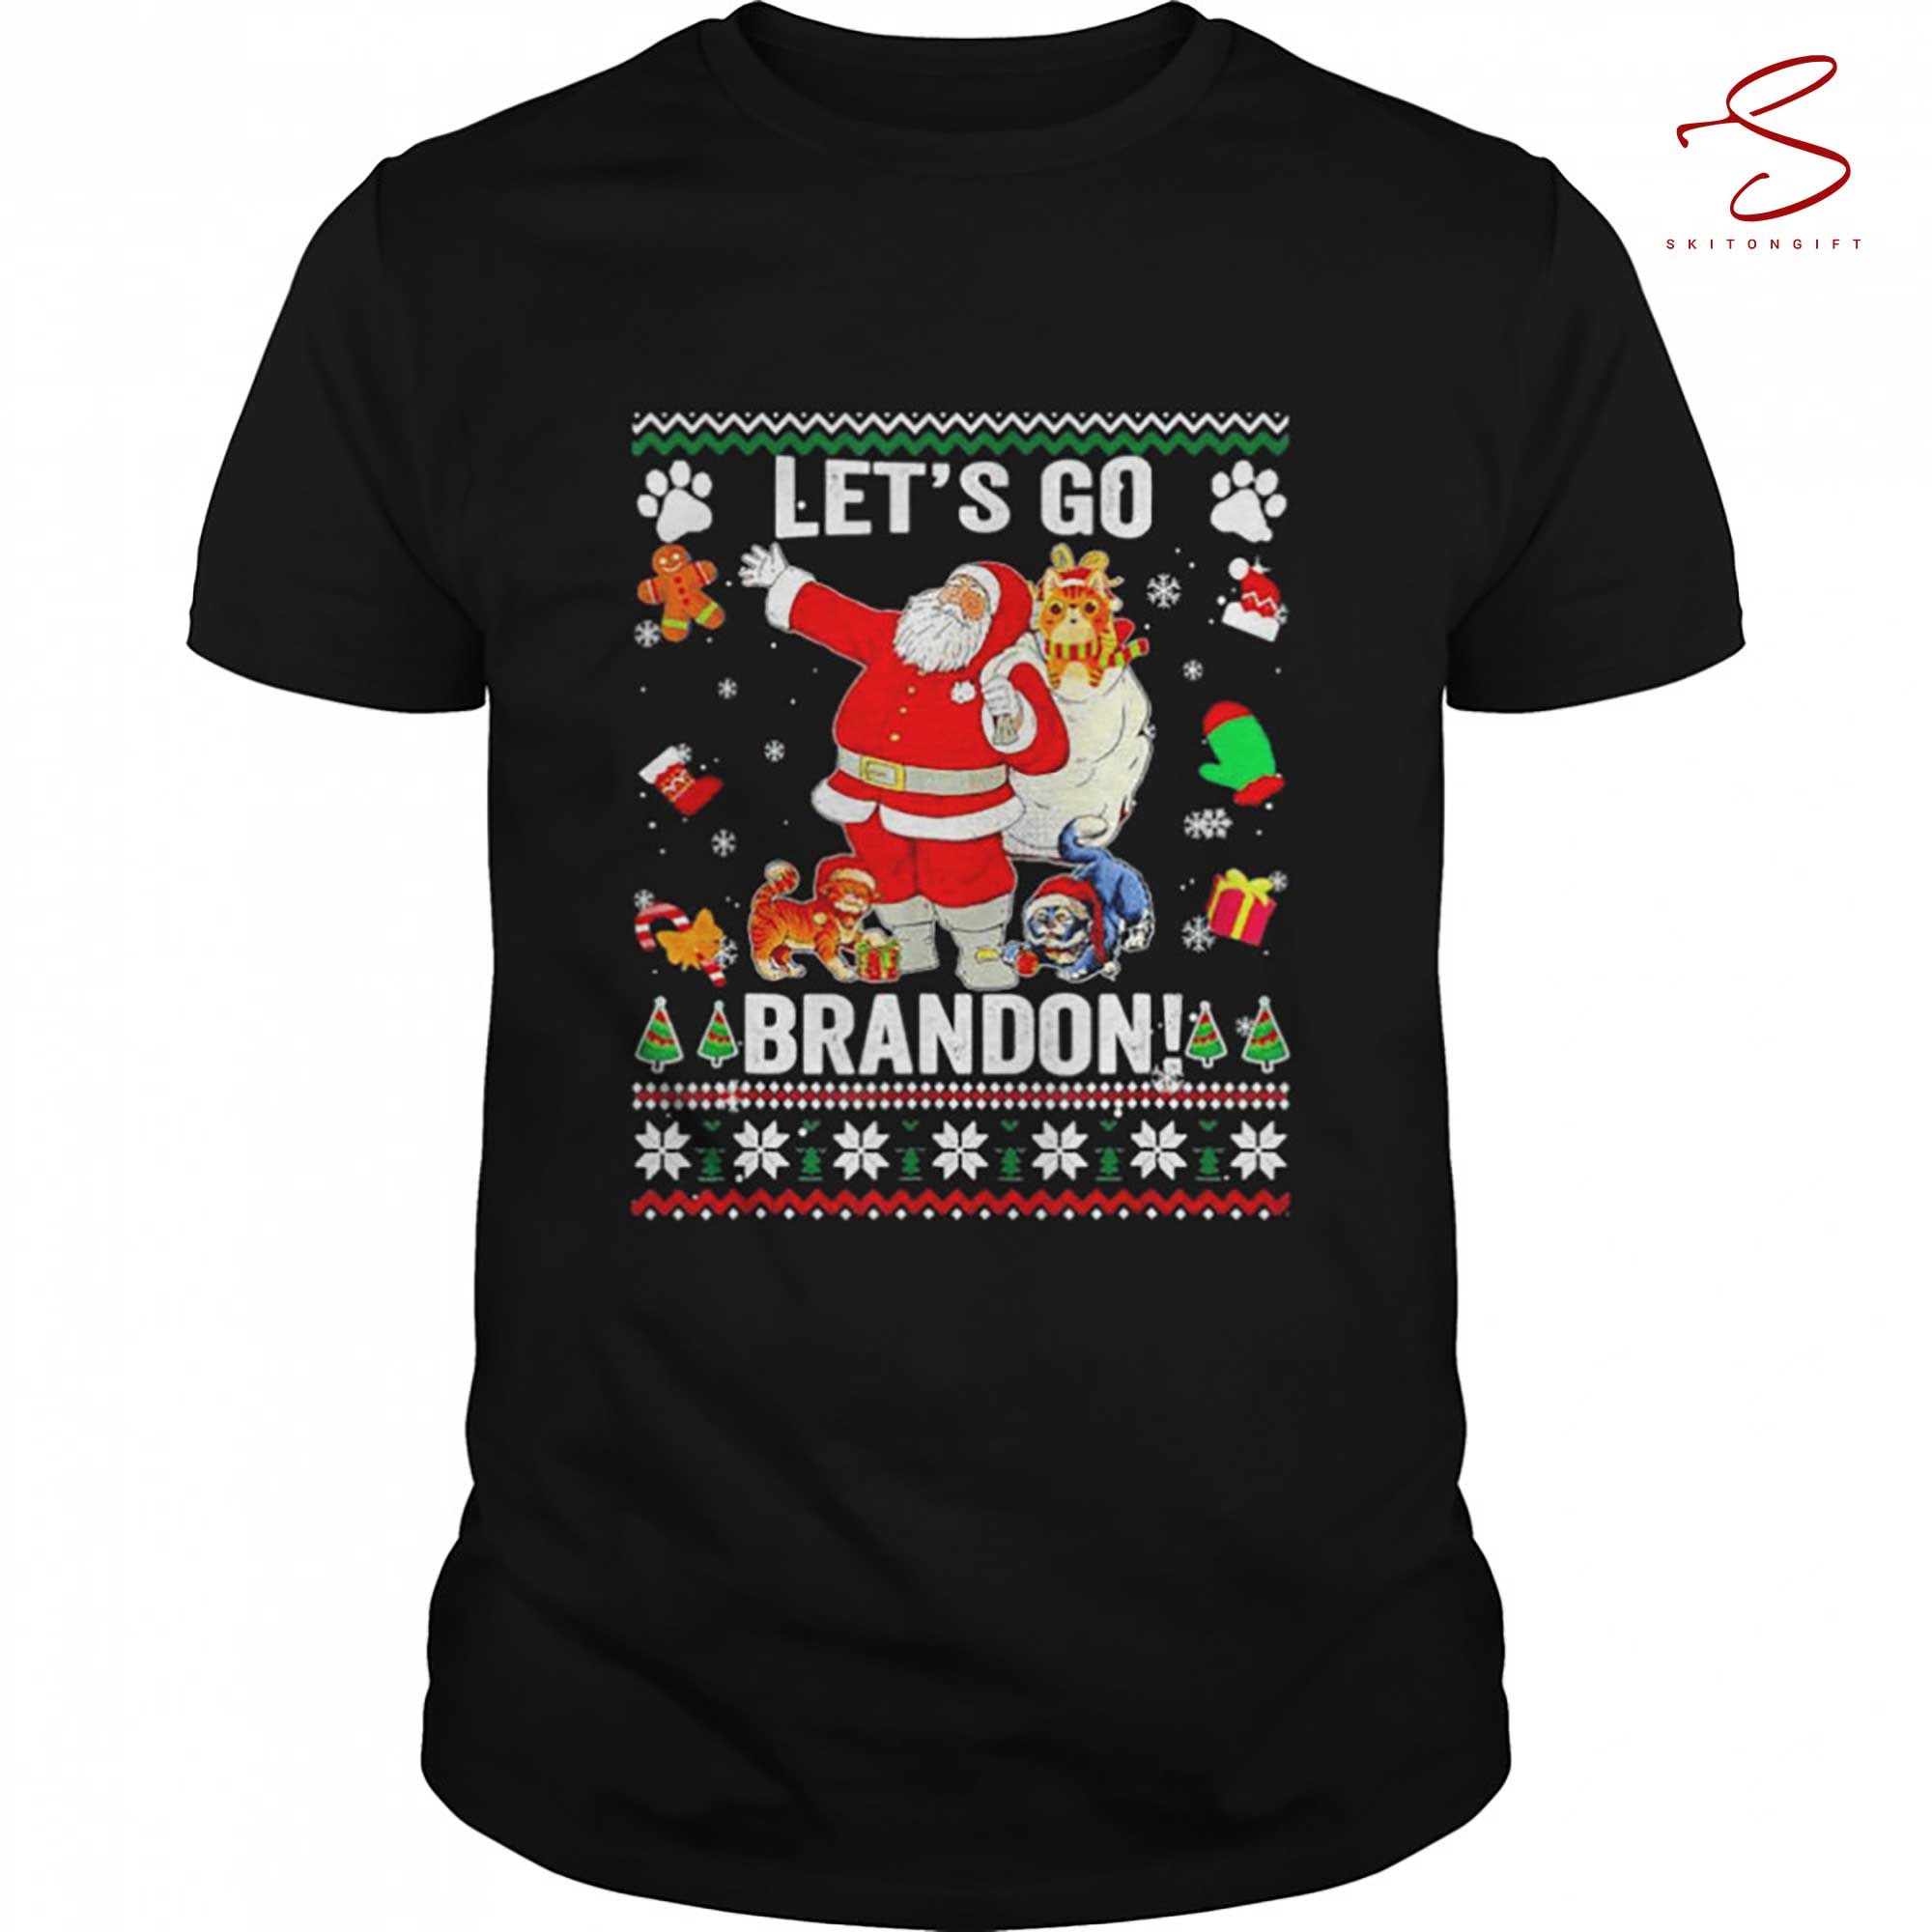 Skitongift All I Want For Christmas Is This Lets Go T Shirt